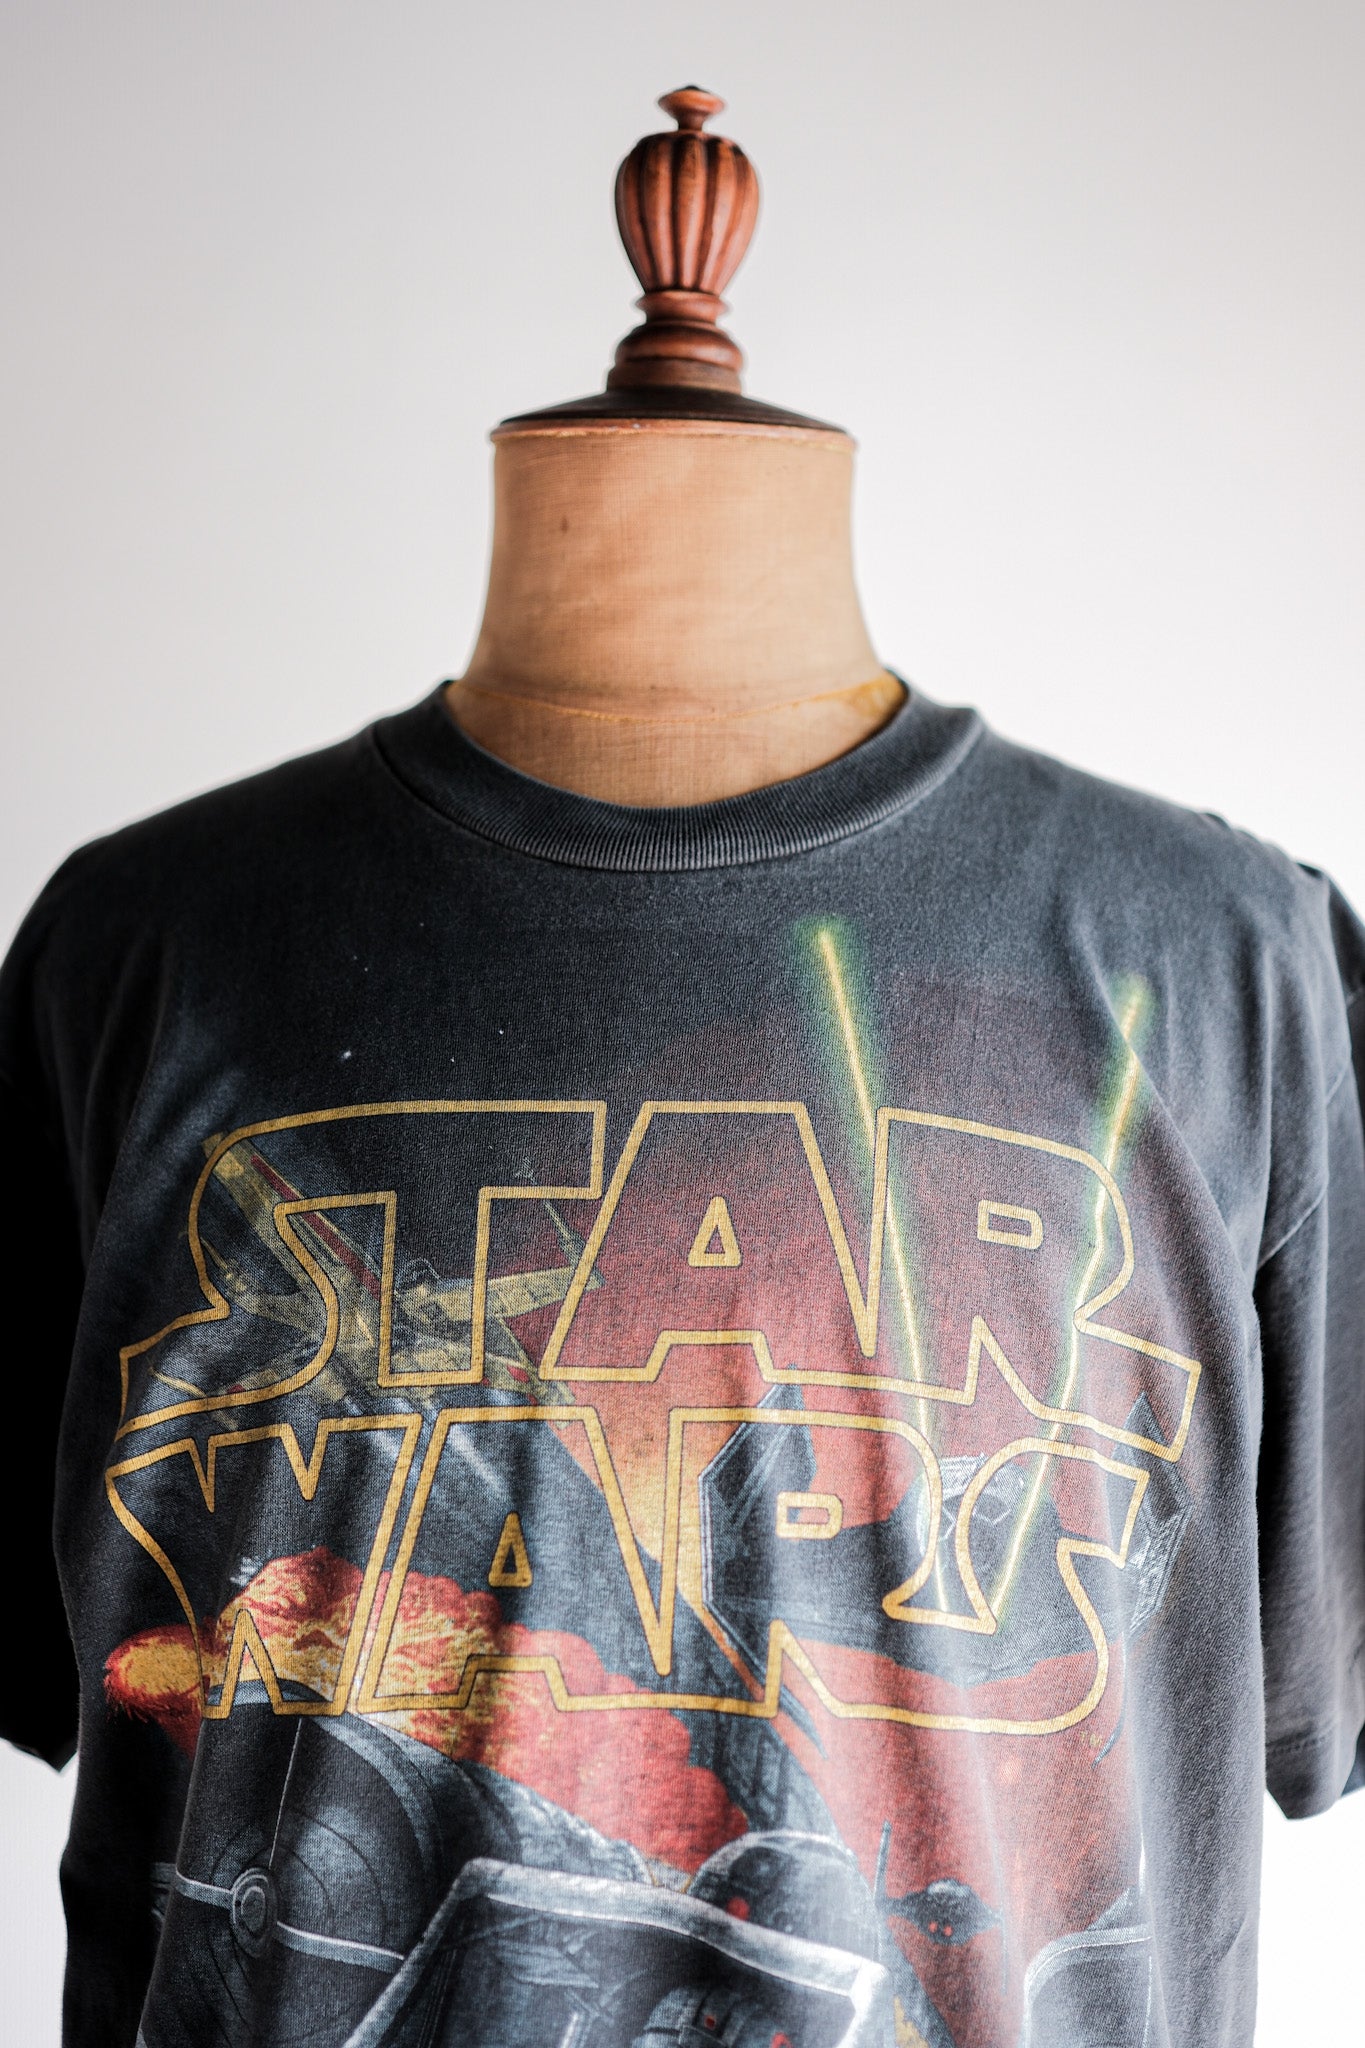 [~ 90's] Vintage Movie Print T-Shirt Size.l ​​"Star Wars" "Made in U.S.A."